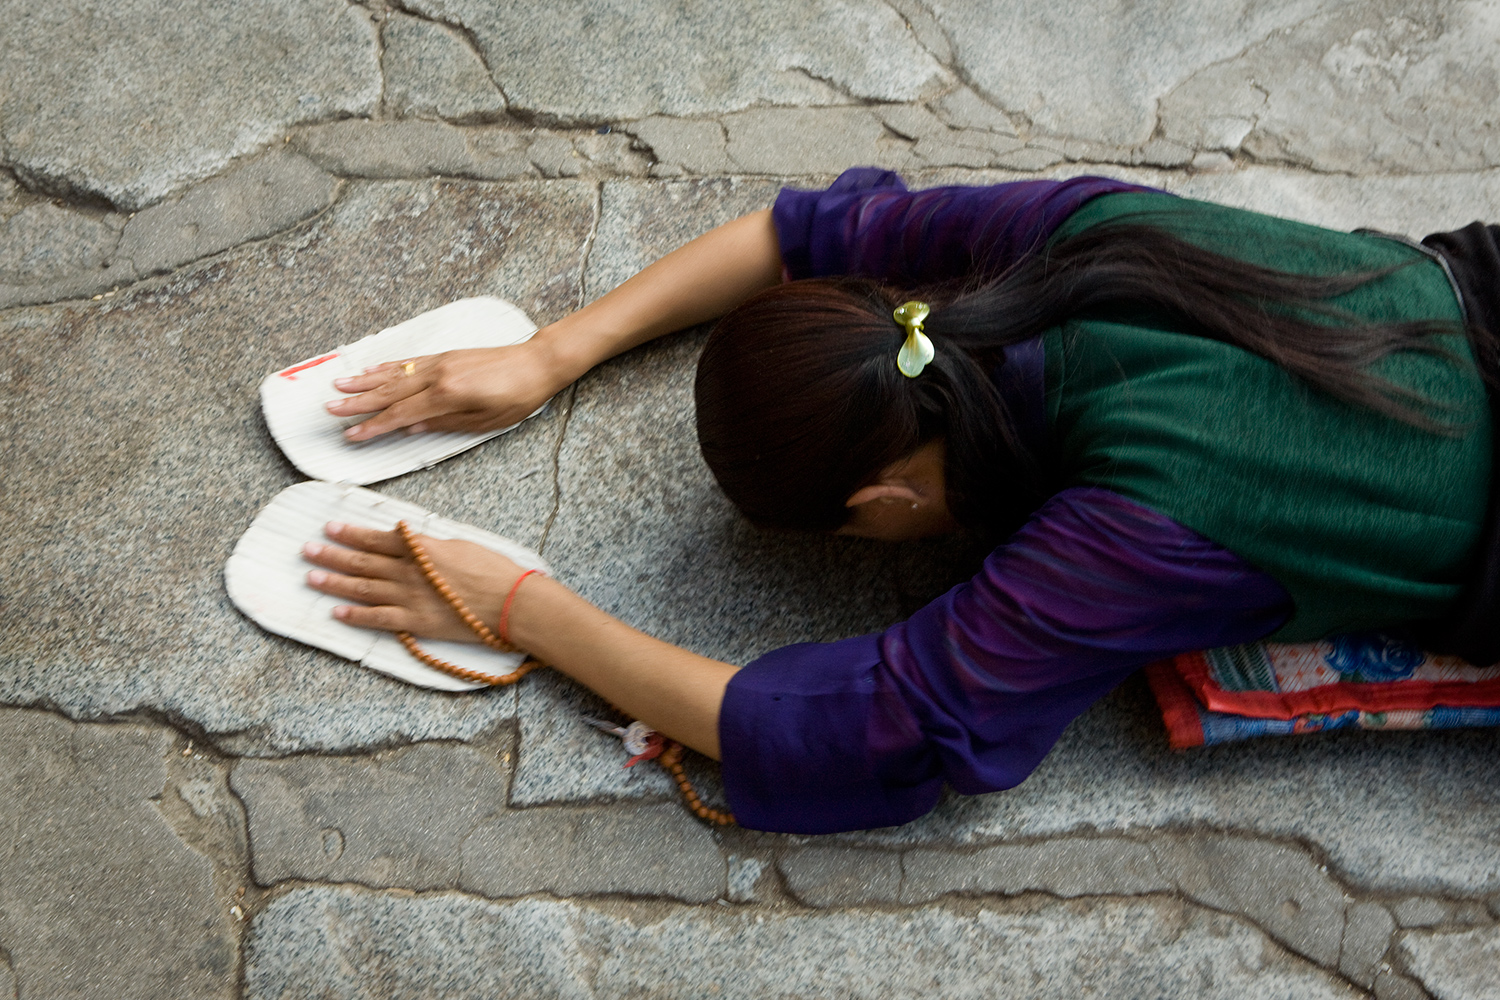  A pilgrim prostrates herself repeatedly in front of the Jokhang, the first Buddhist temple in Tibet, which many considered to be the most sacred and important temple in the country. The devout make pilgrimages to the sacred sites in Lhasa, traveling